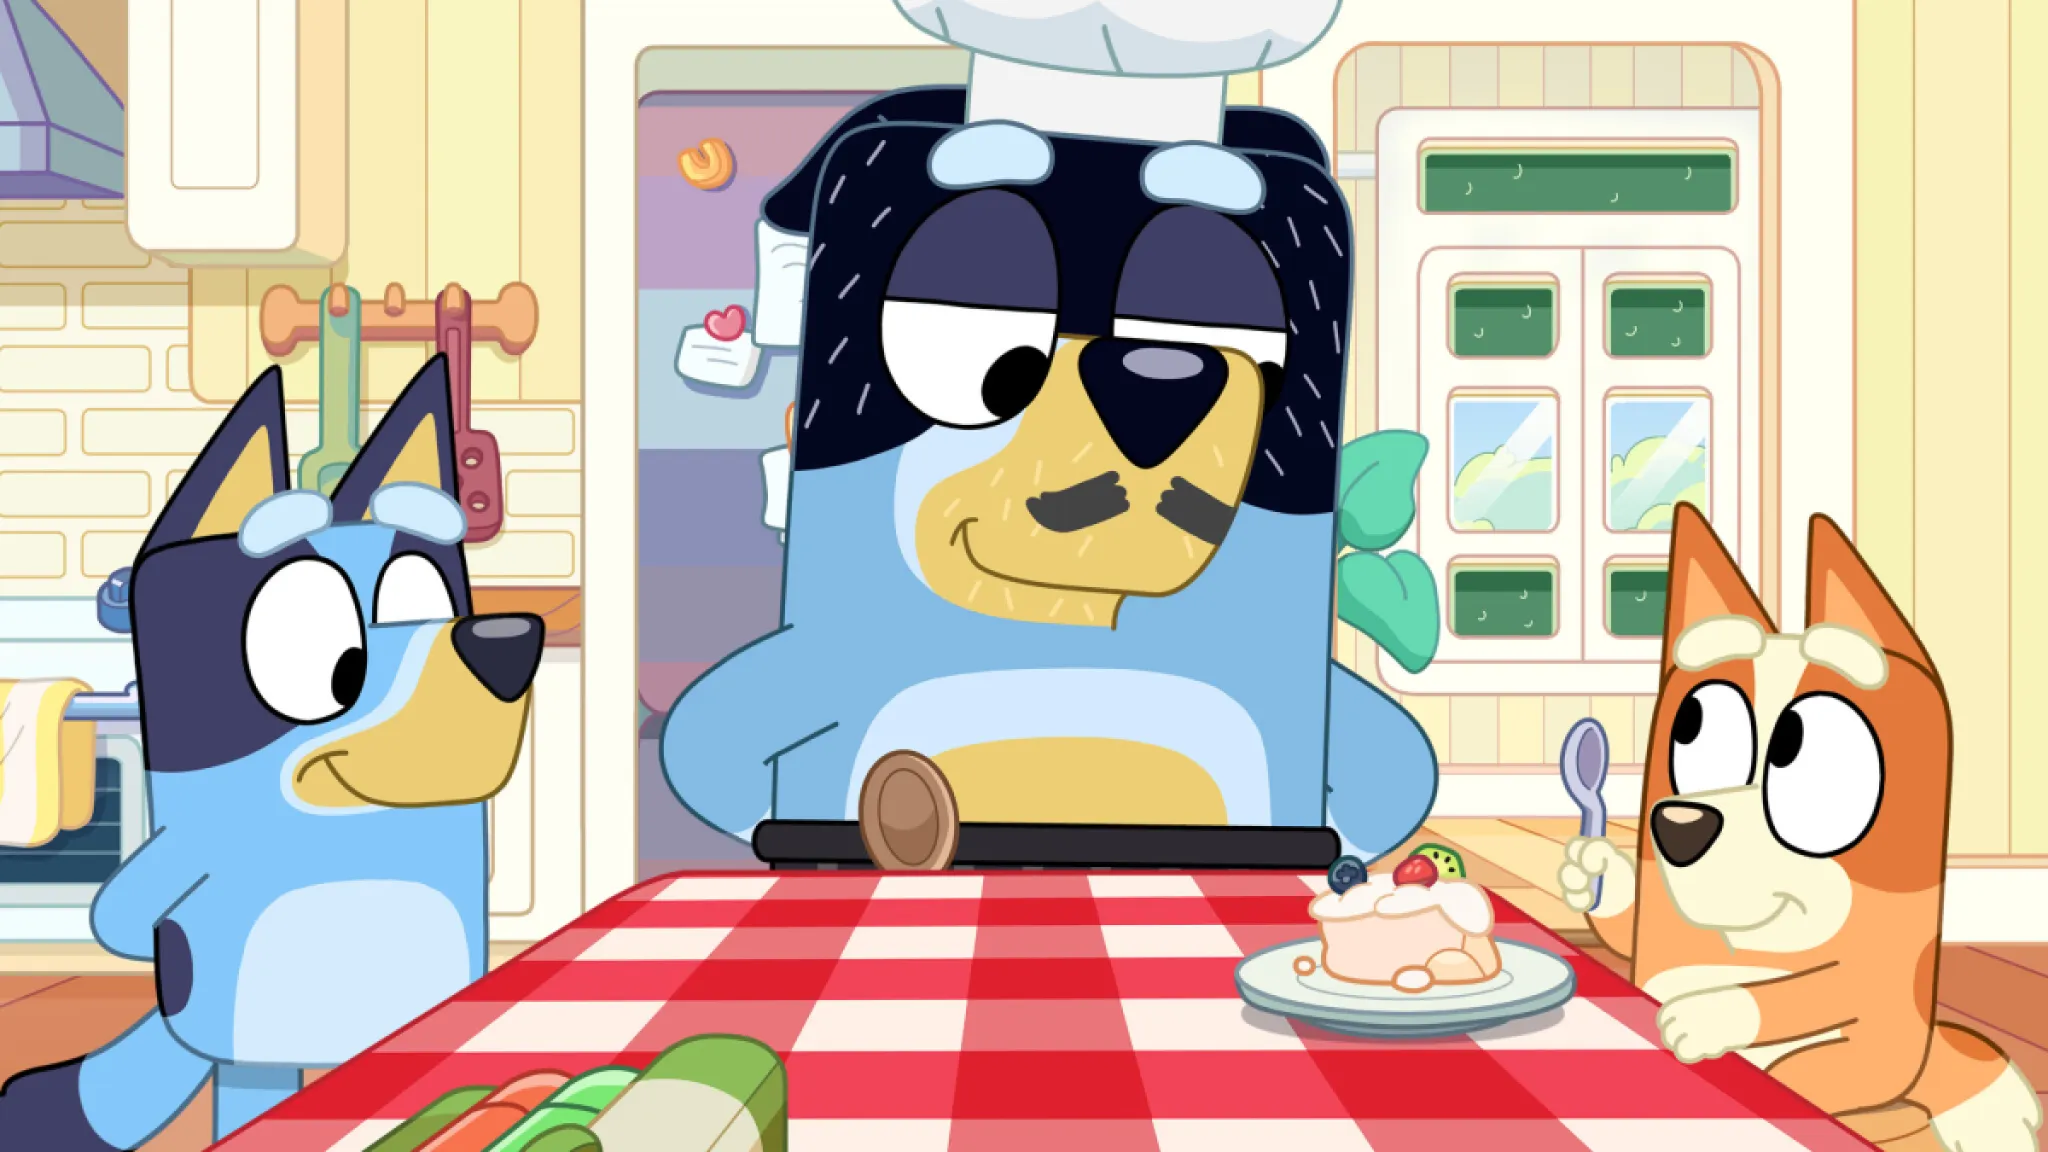 Bandit wears a chef's hat and fake mustache while Bluey and Bingo sit at the kitchen table. Bandit smiles down at Bingo.